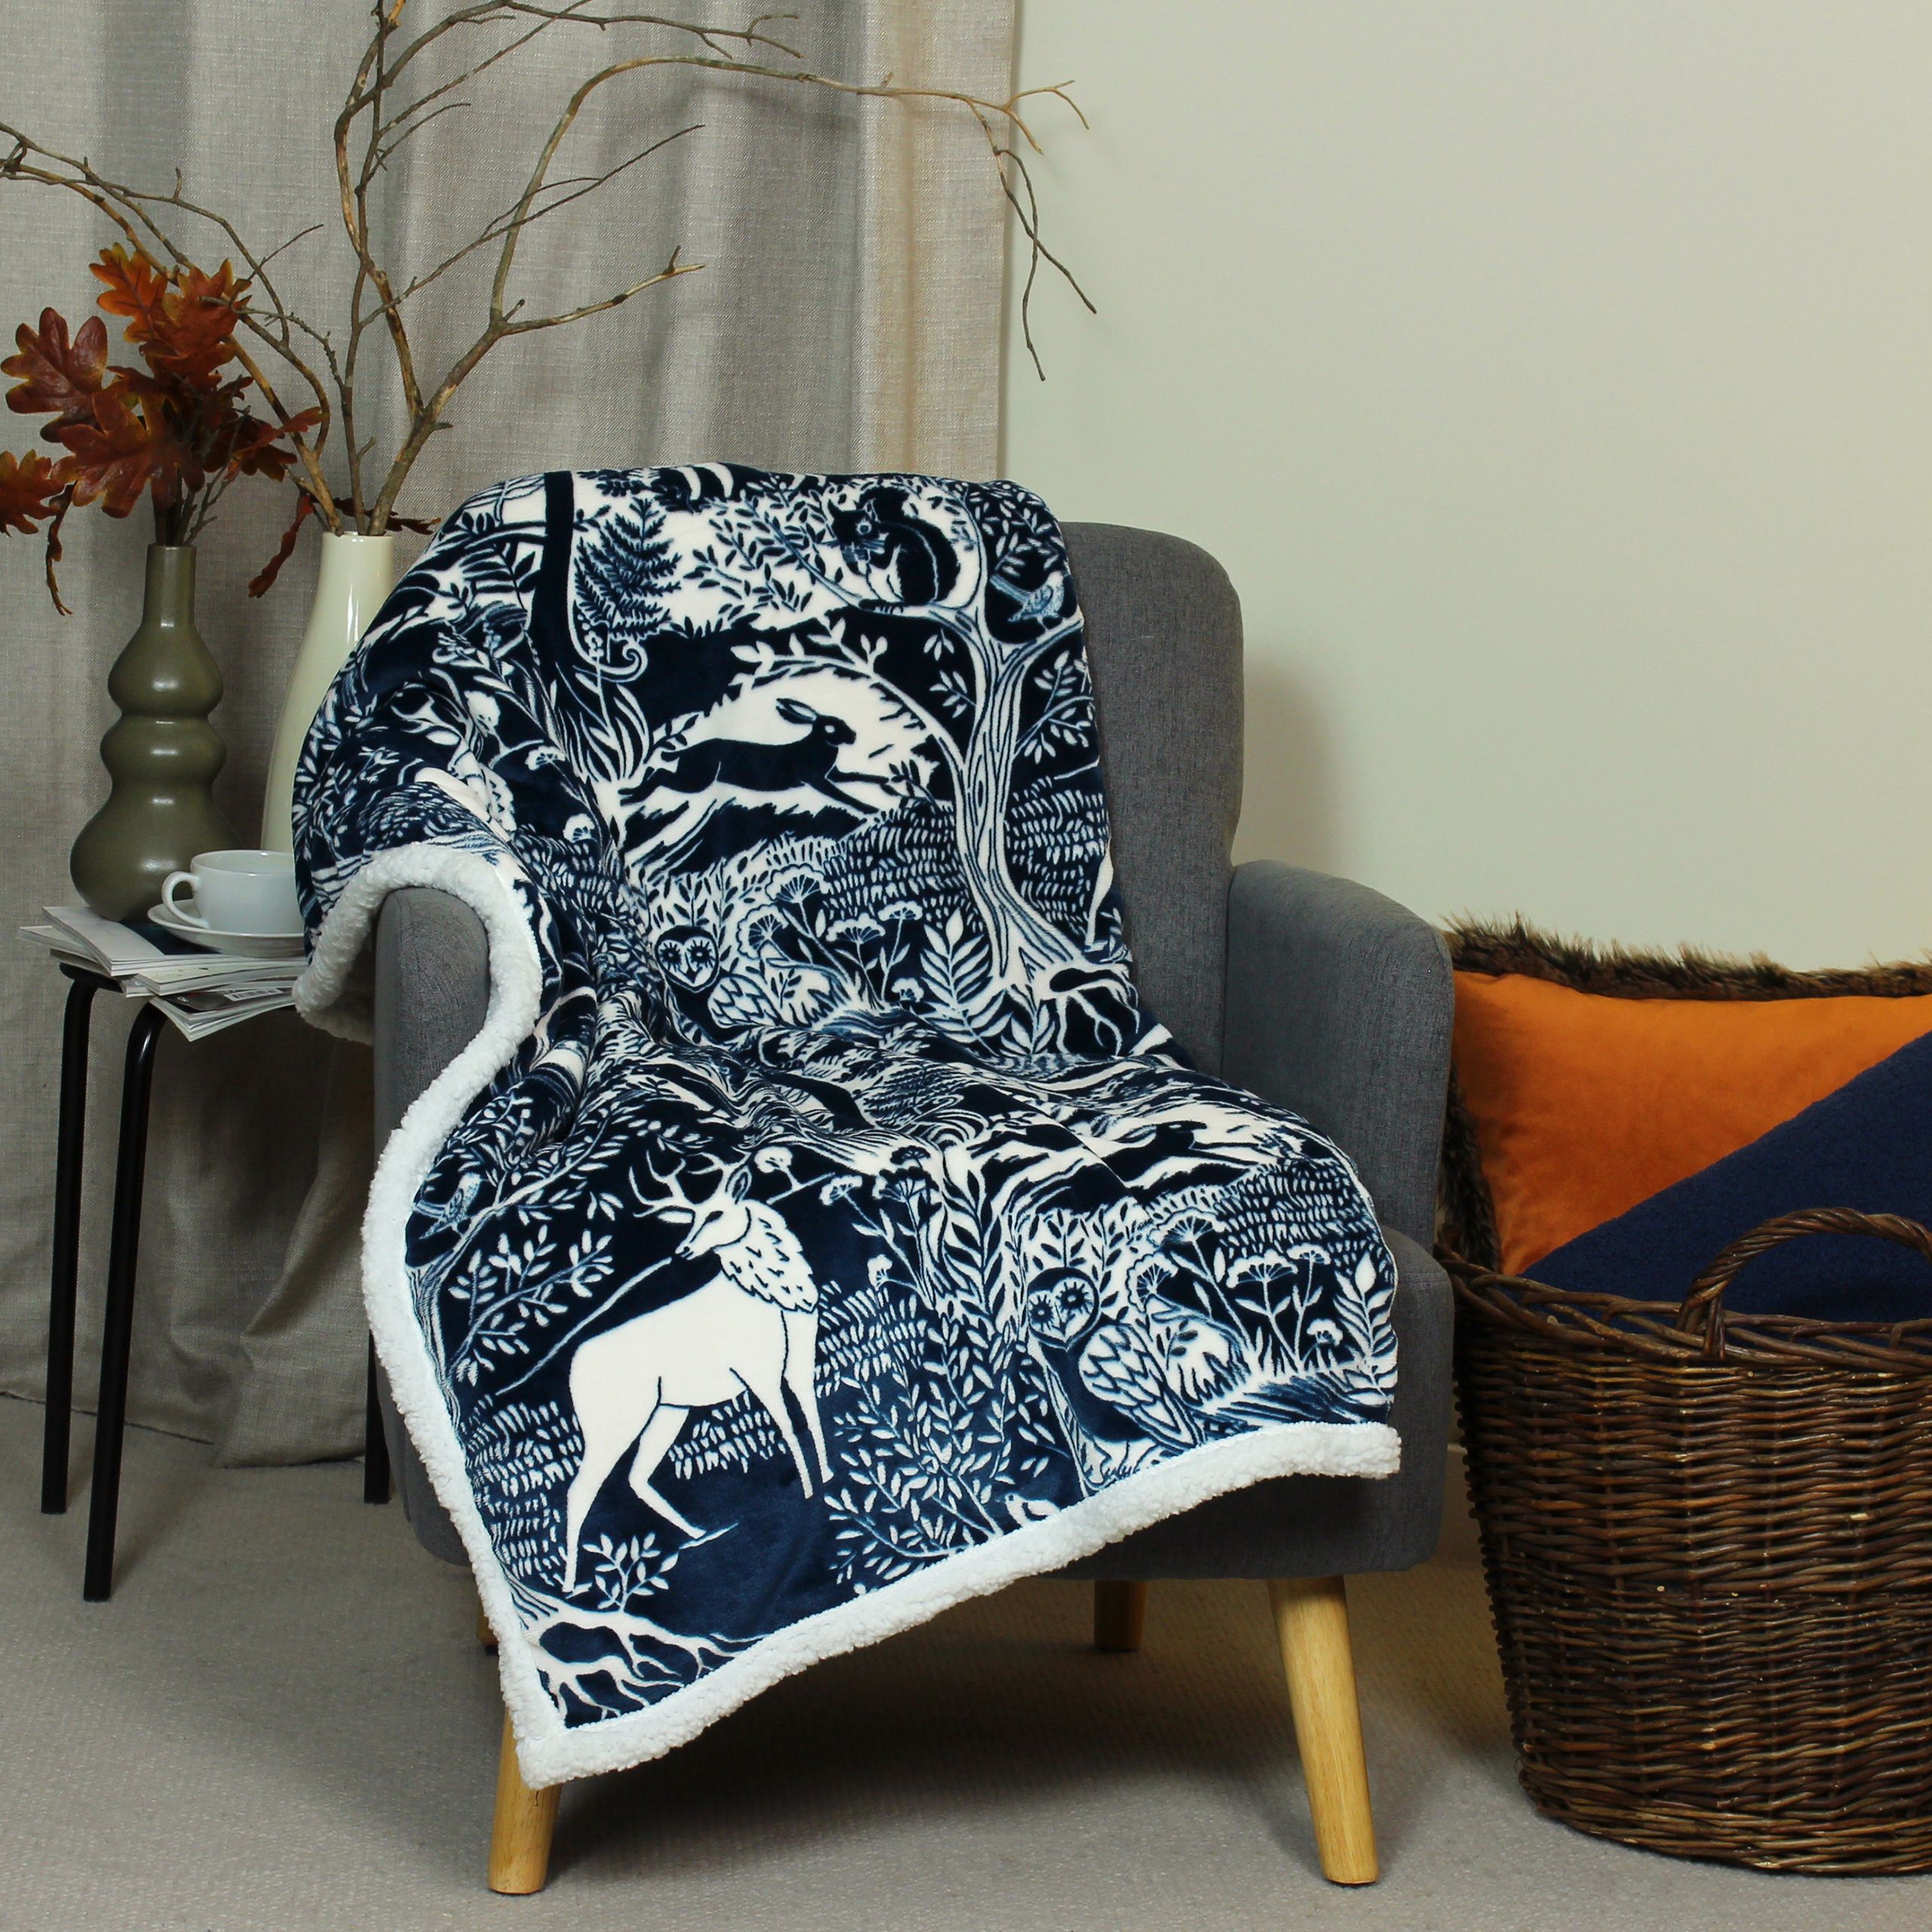 Invite nature into your home with winter woods throw. The design features a stunning woodblock inspired print with plenty of woodland animals and trees. Created with luxurious 230gsm microfleece for a super soft front that emanates an opulent sheen. With a 230gsm sherpa reverse in a optic white you'll be keeping toasty warm all night long.